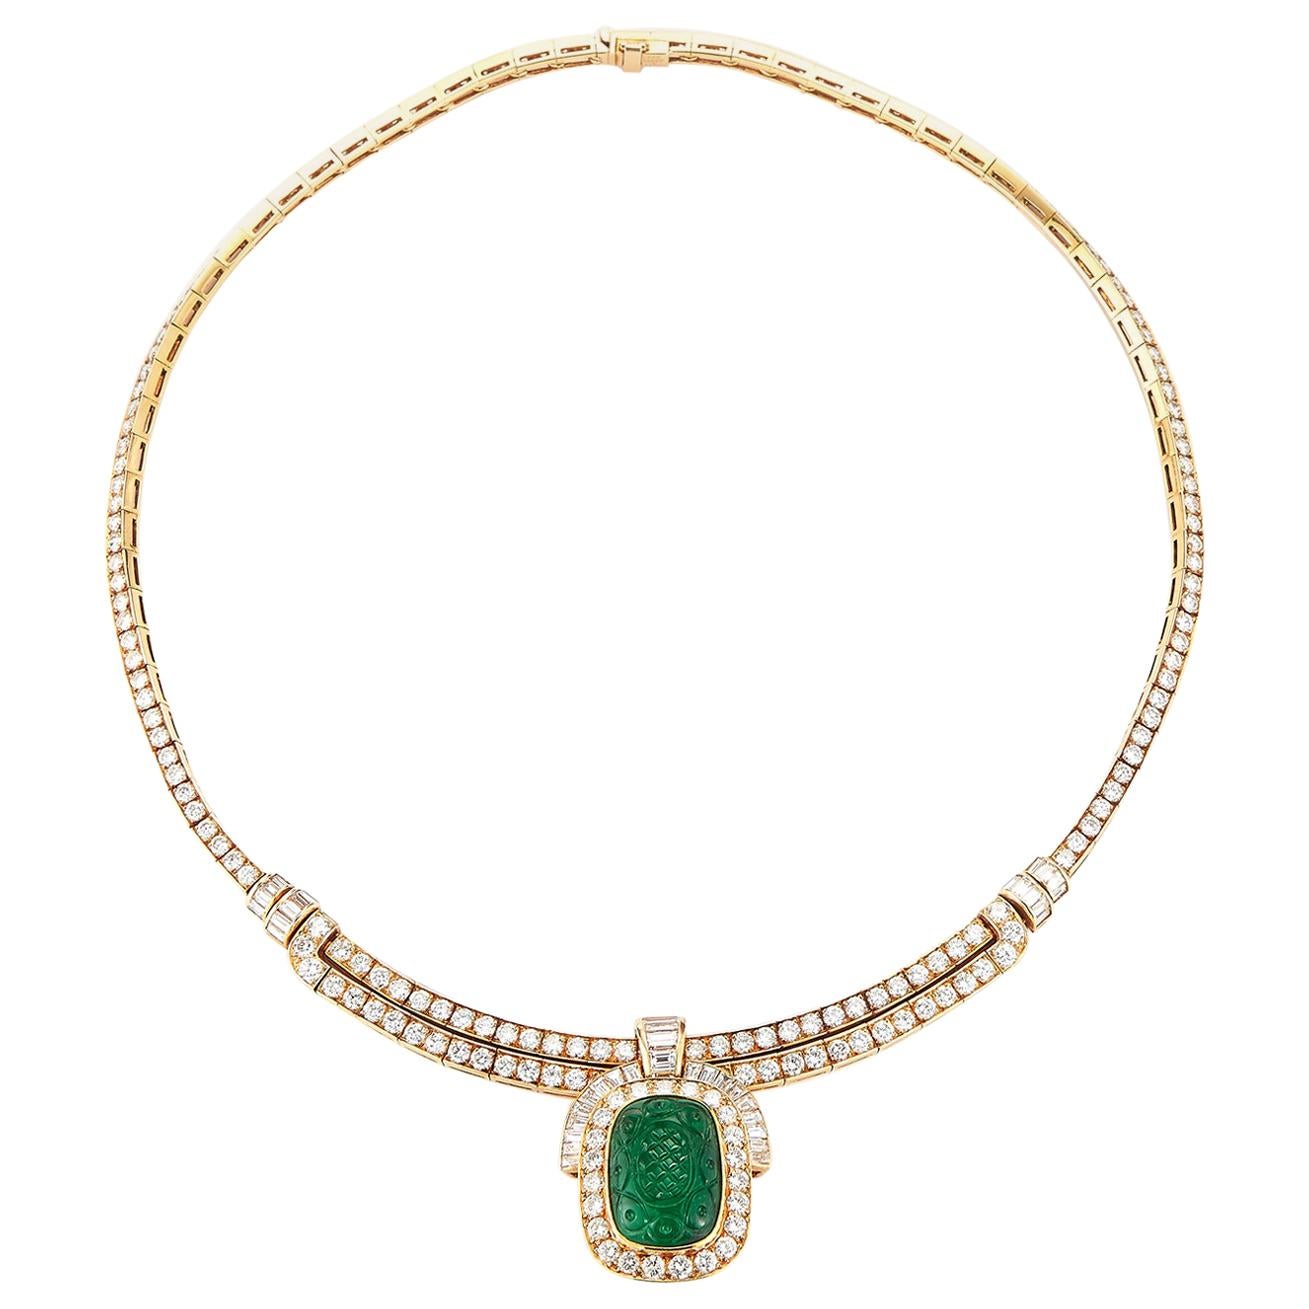 Van Cleef & Arpels Carved Emerald and Diamond Necklace